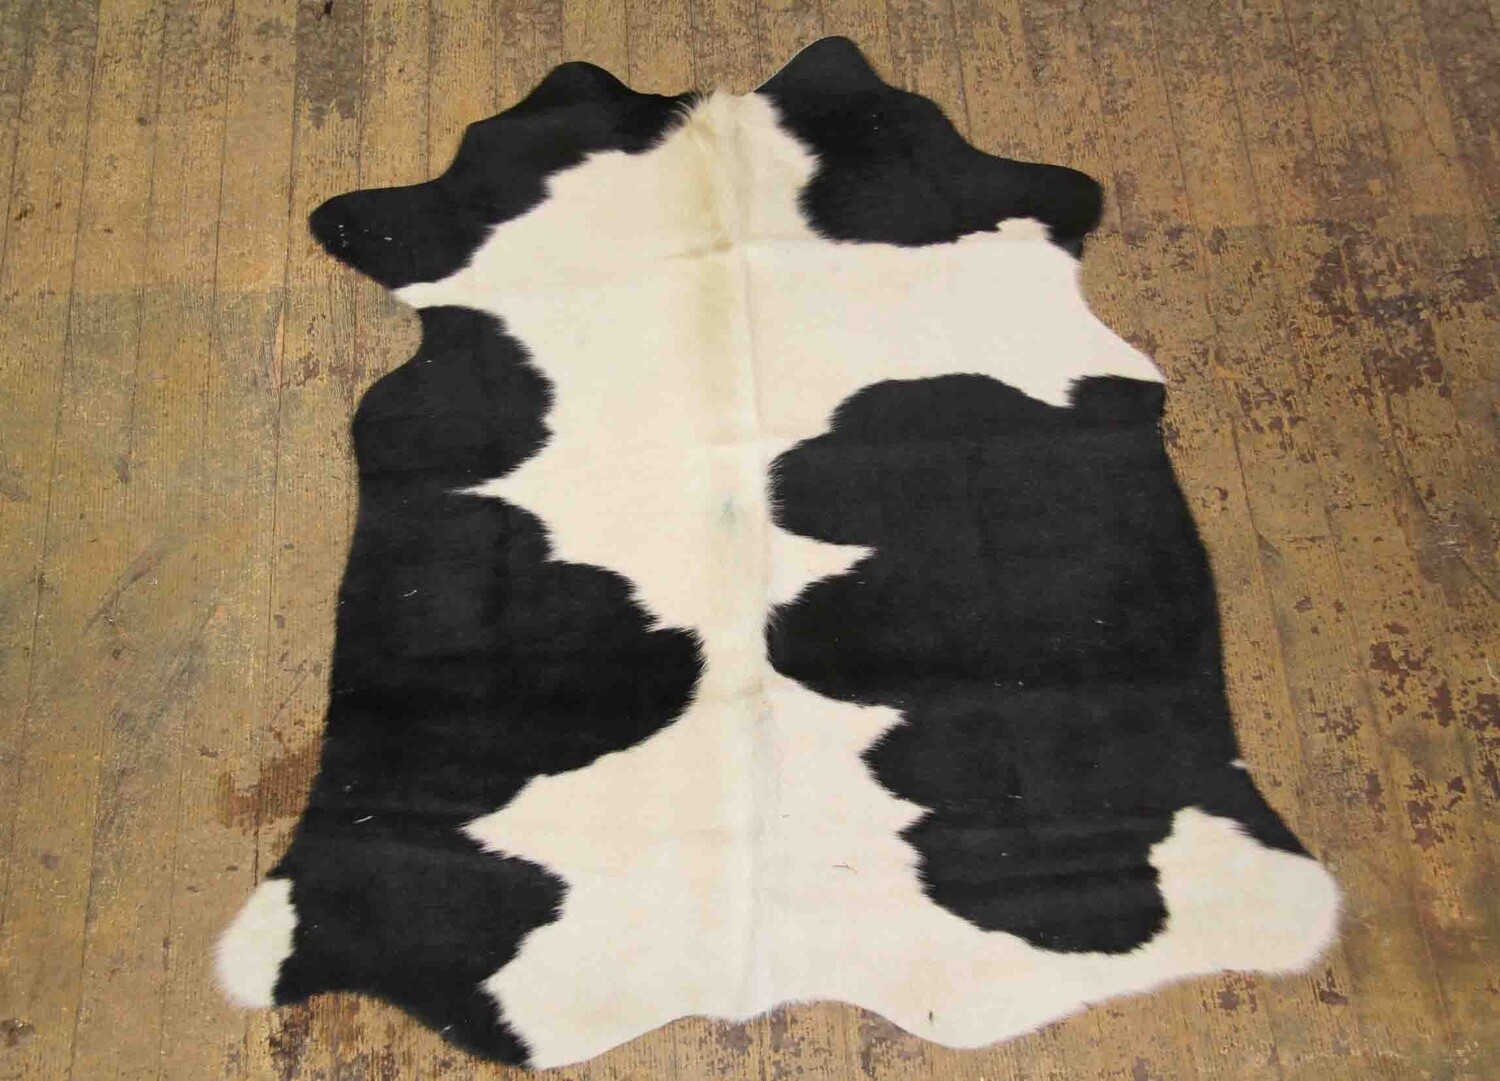 COW HIDE RUG NATURAL BROWN OR BLACK SOLID OR WITH WHITE ASSORTED #1 A QUALITY 19ft2 AVERAGE 12053